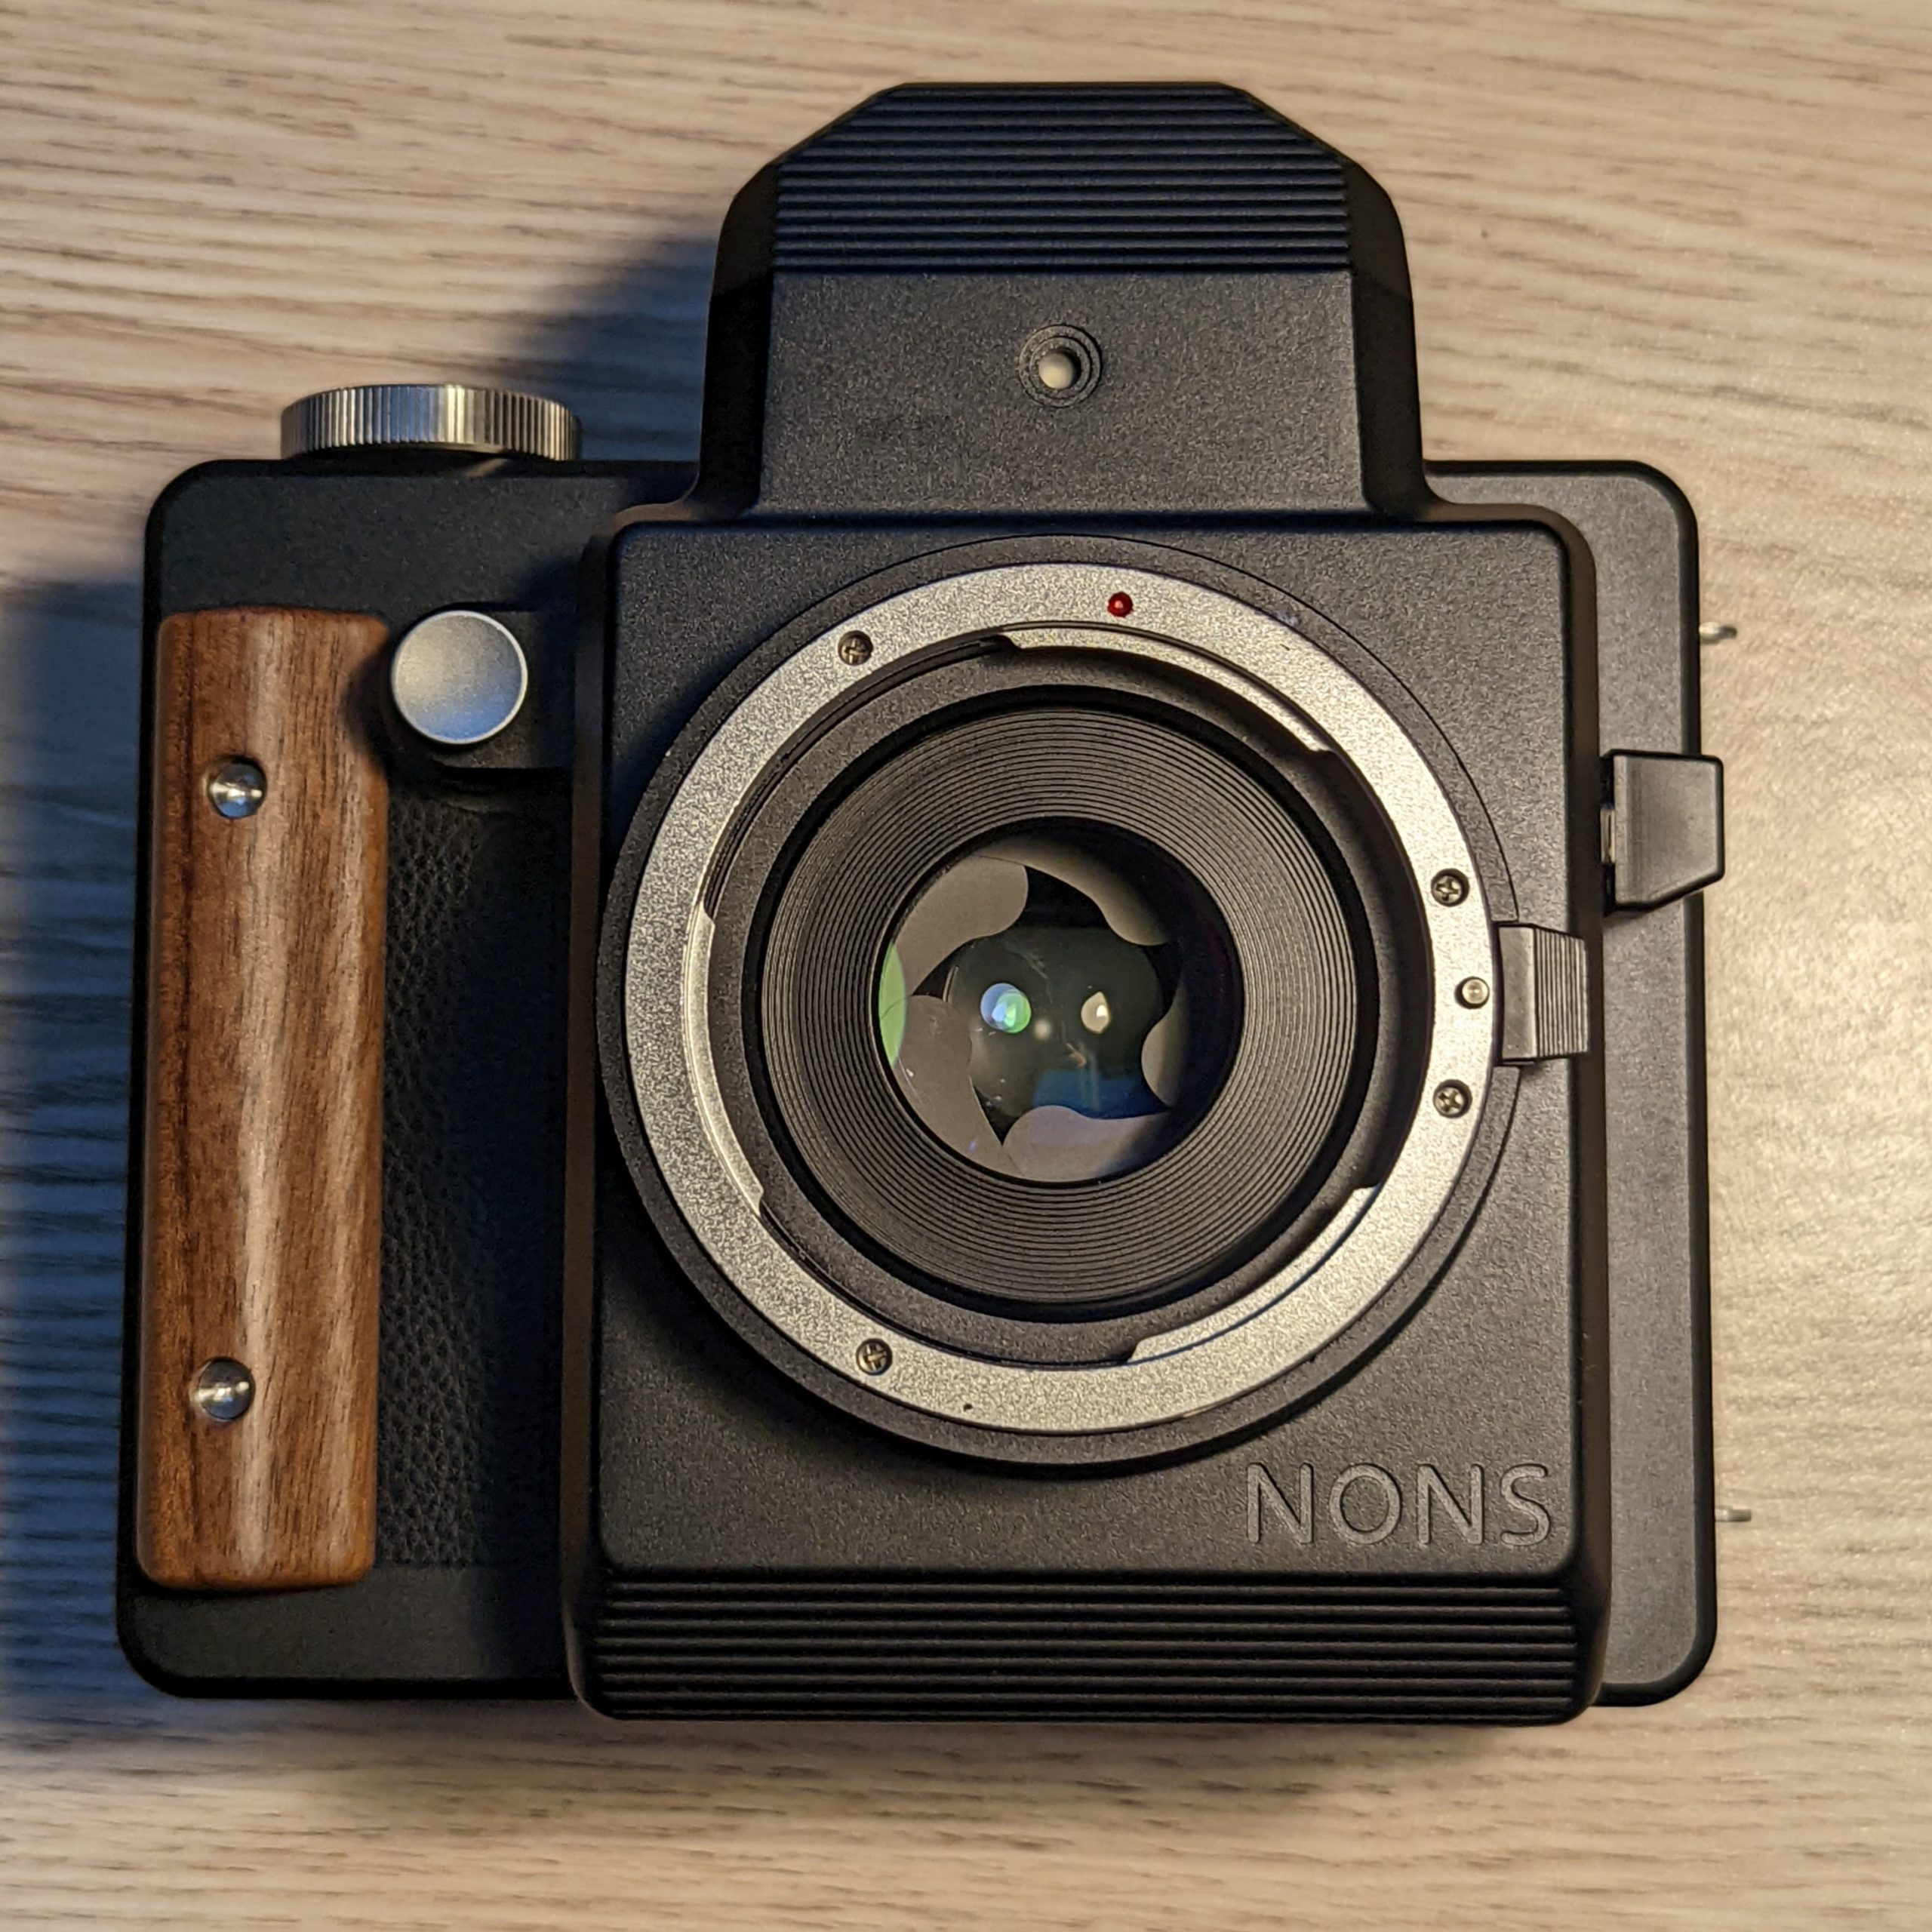 Nons SL660 without lens